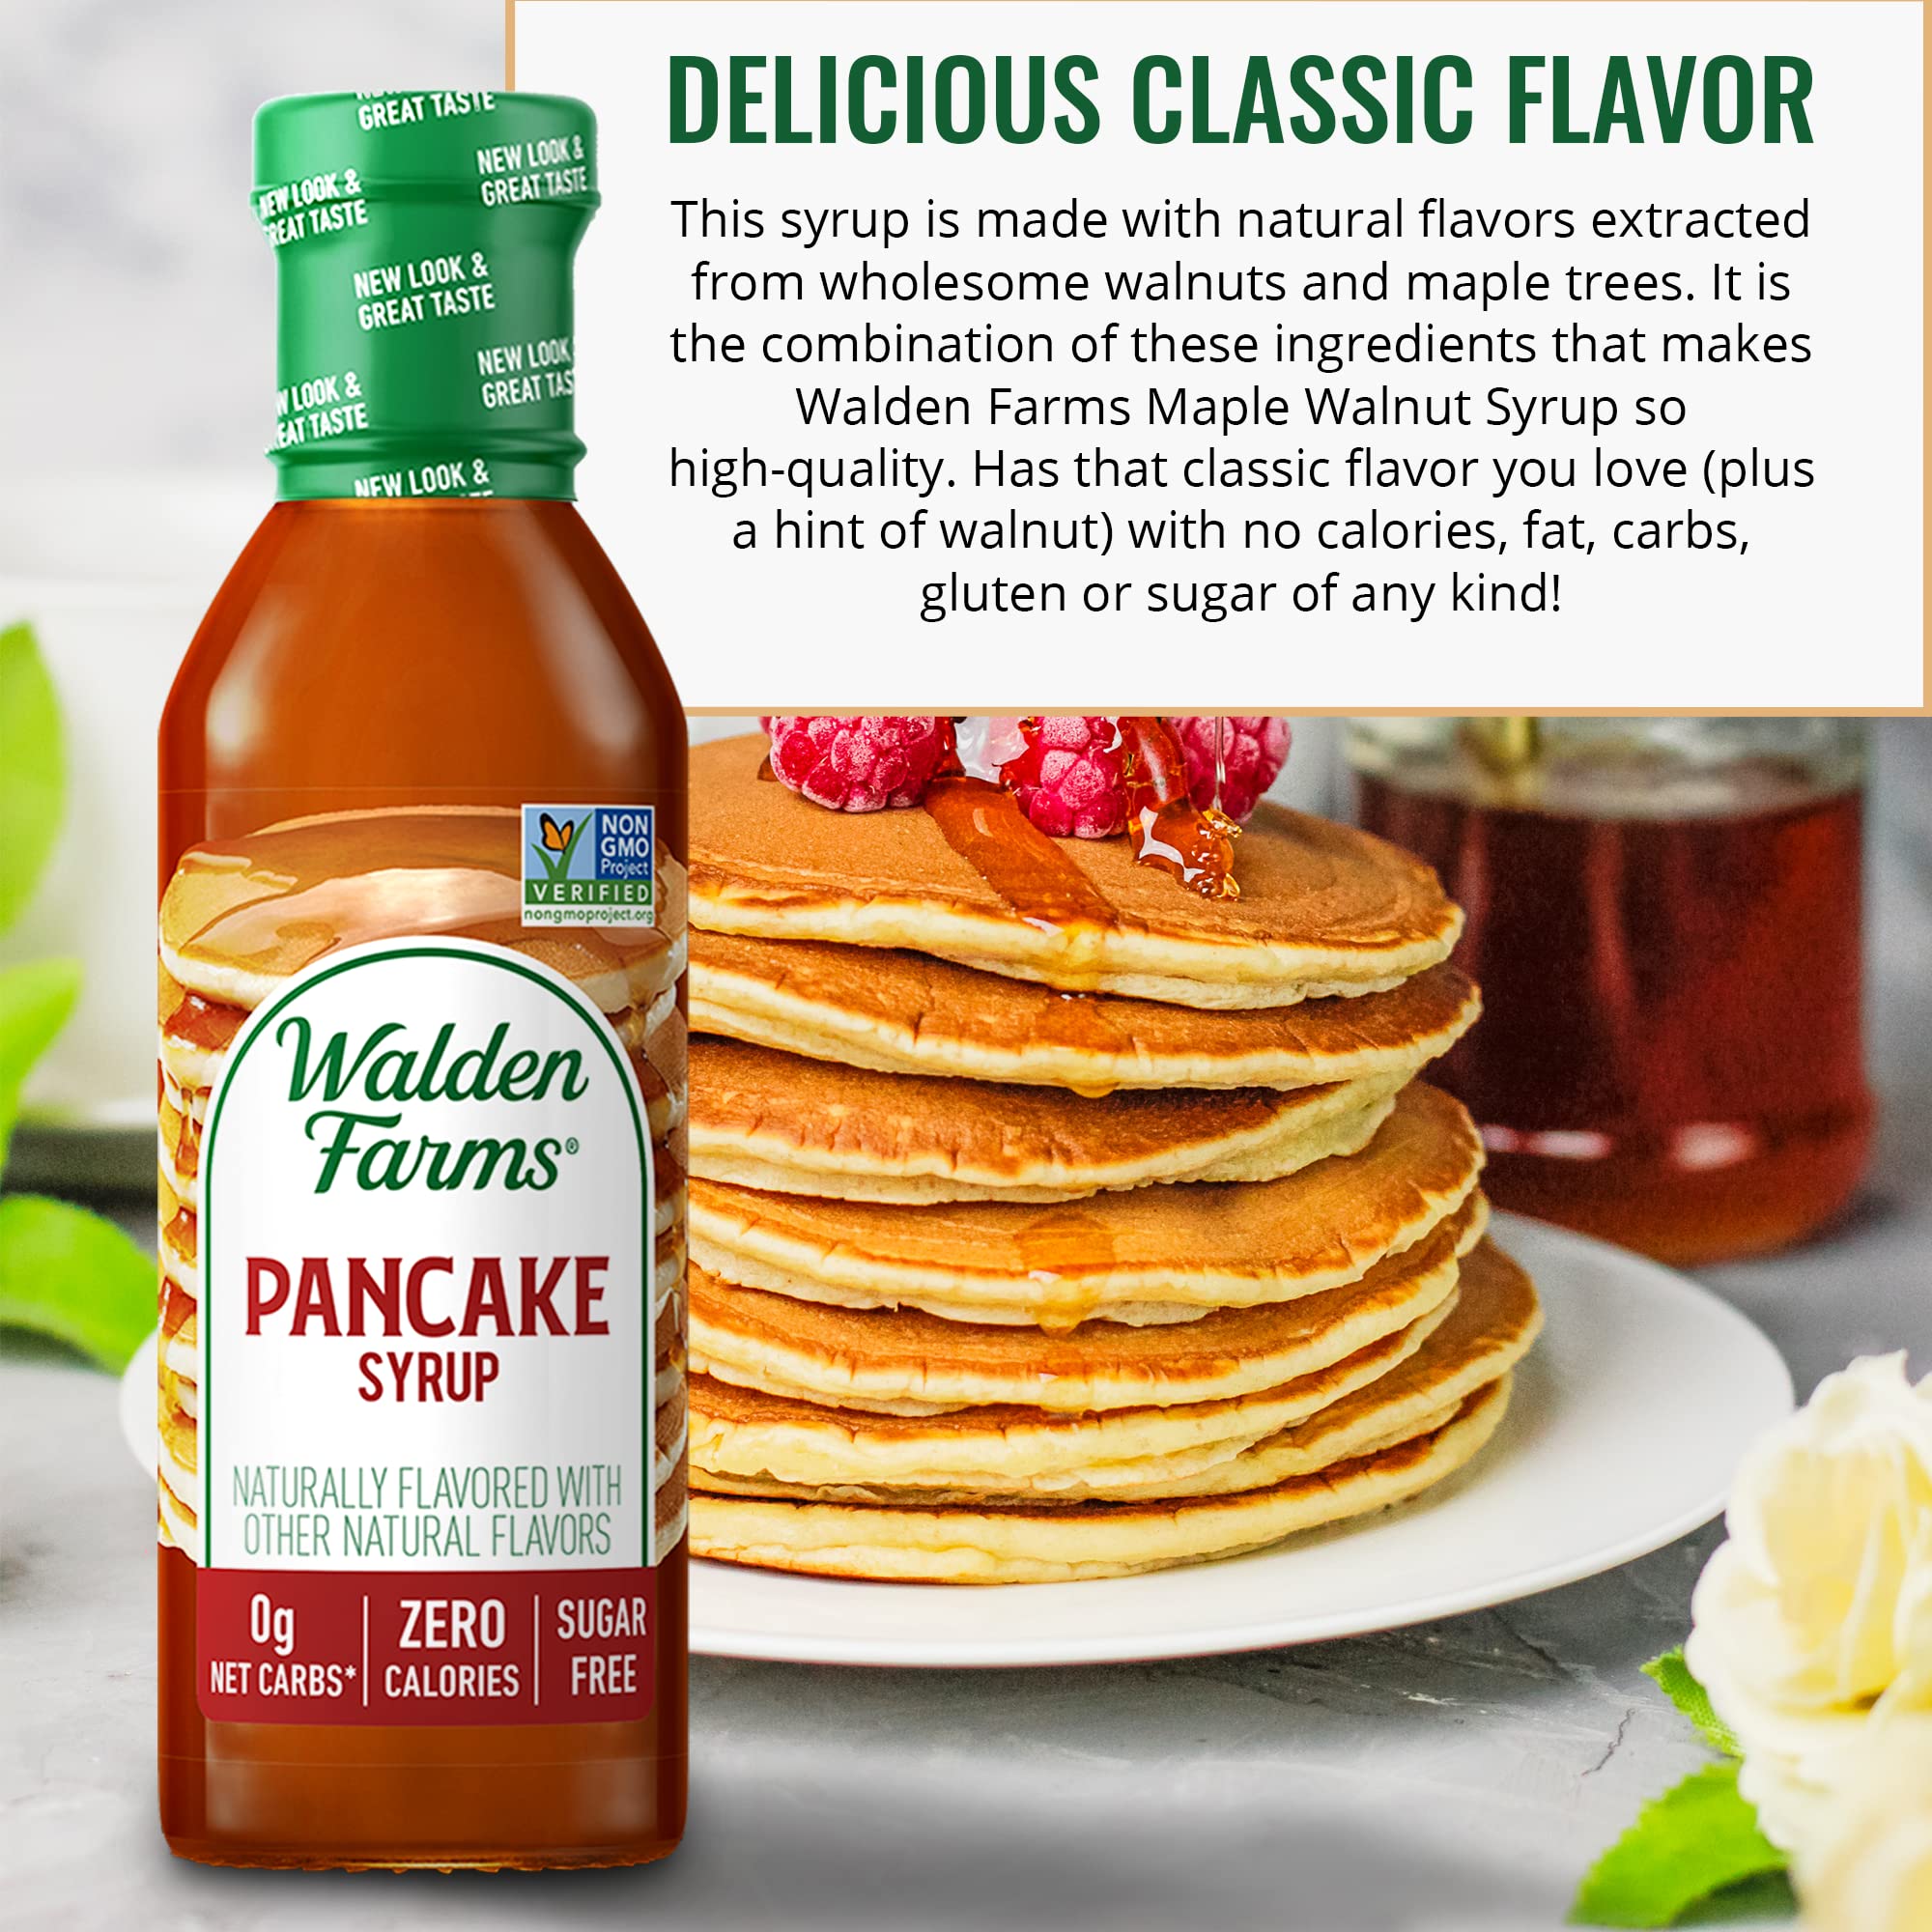 Walden Farms Pancake Syrup 12 oz. (Pack of 2) Sweet Syrup - Near Zero Fat, Sugar and Calorie - For Pancakes, Waffles, French Toast, Ice Cream, Desserts, Snacks, Appetizers and Many More